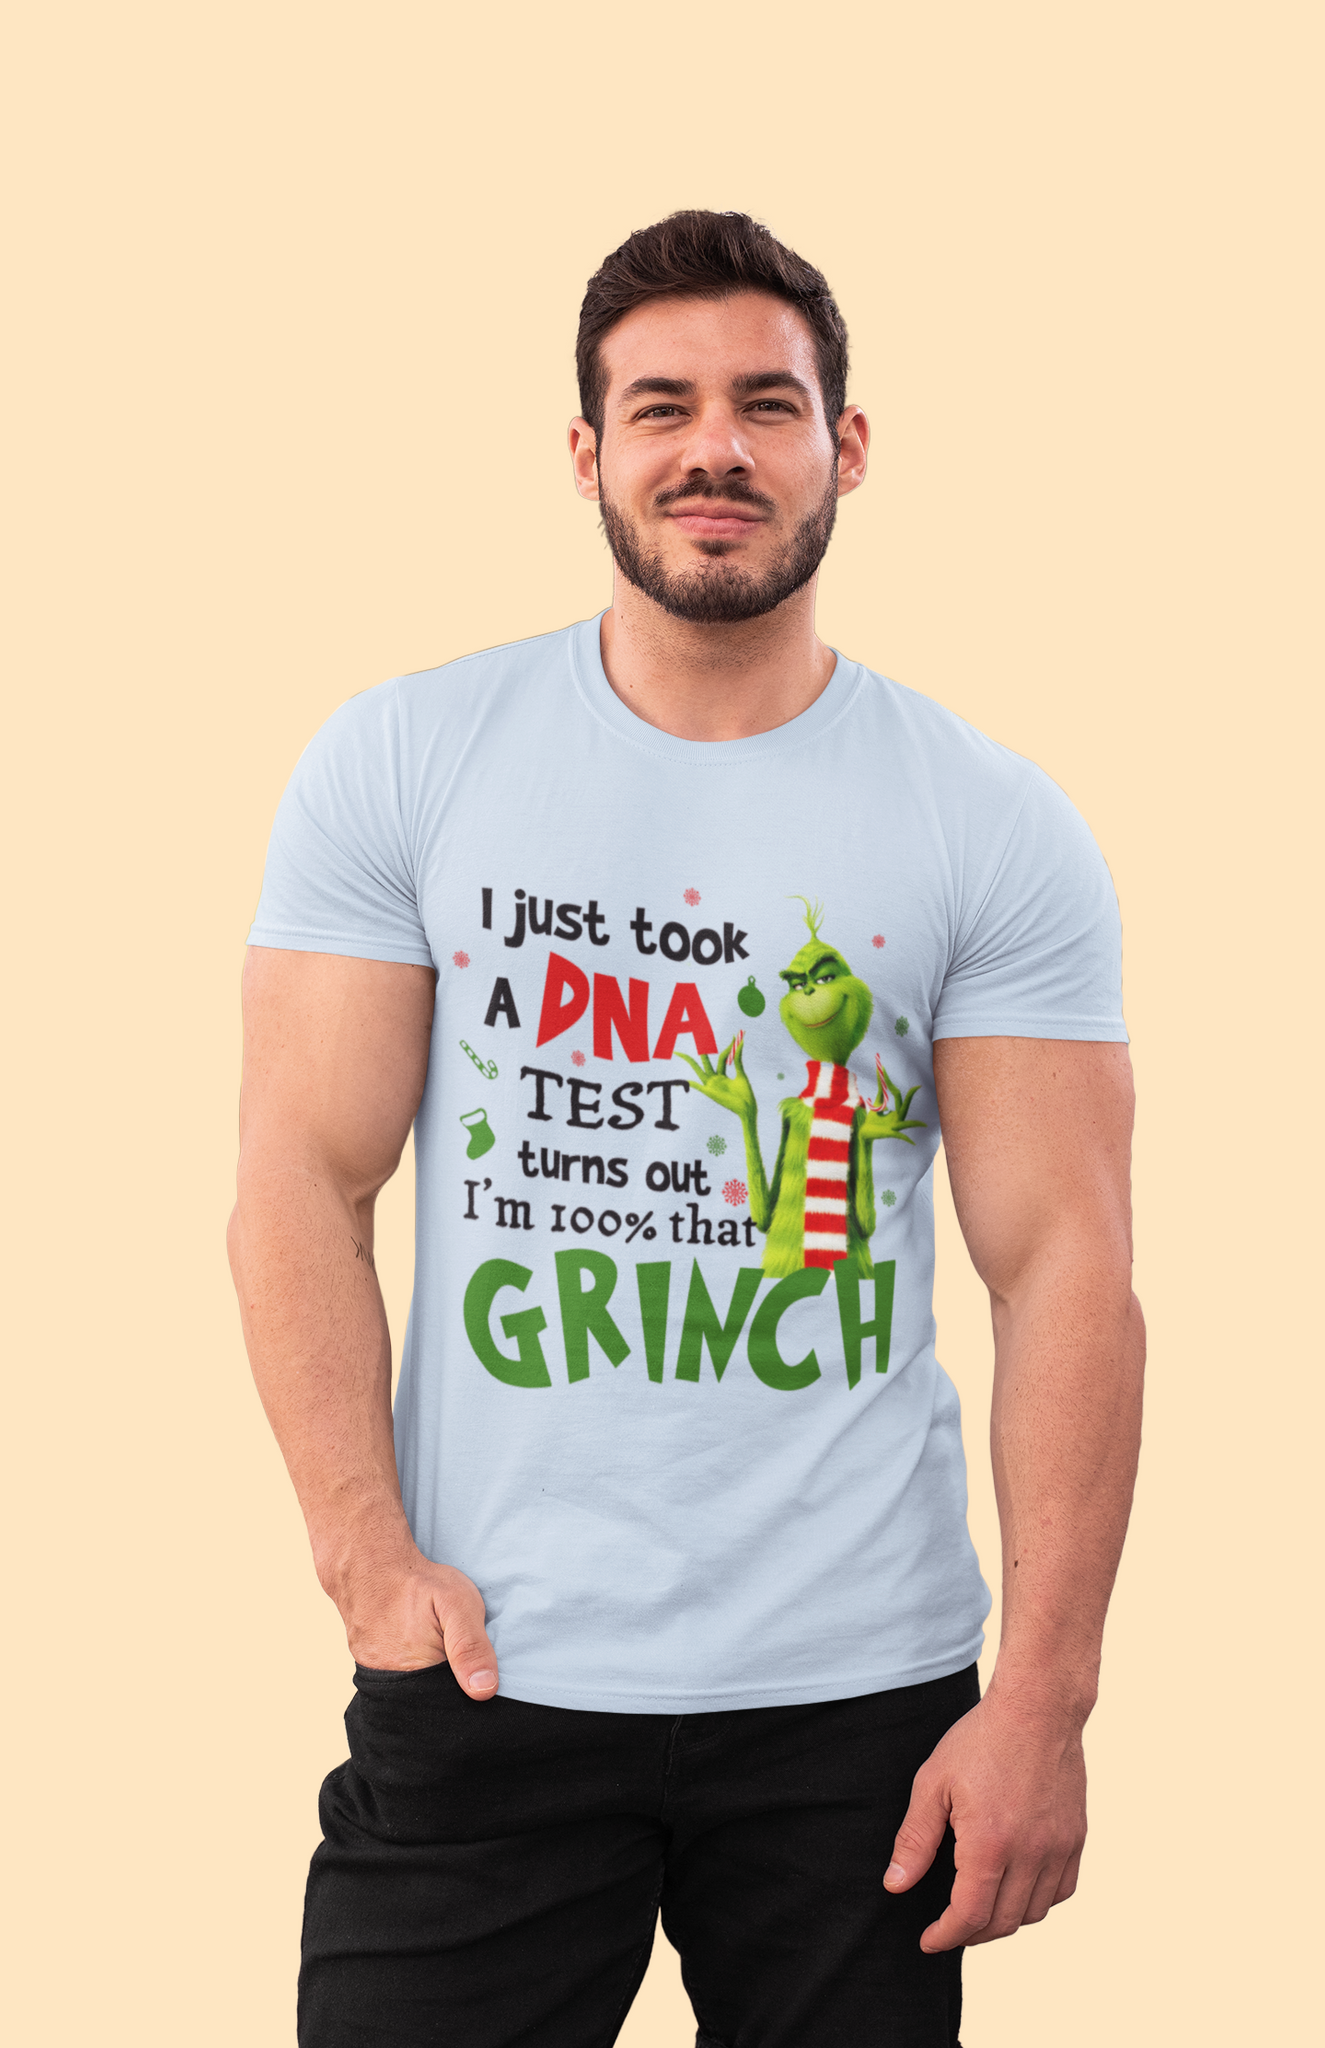 Grinch T Shirt, I Just Took A DNA Test Tshirt, Turn Out Im 100% That Grinch T Shirt, Christmas Movie Shirt, Christmas Gifts